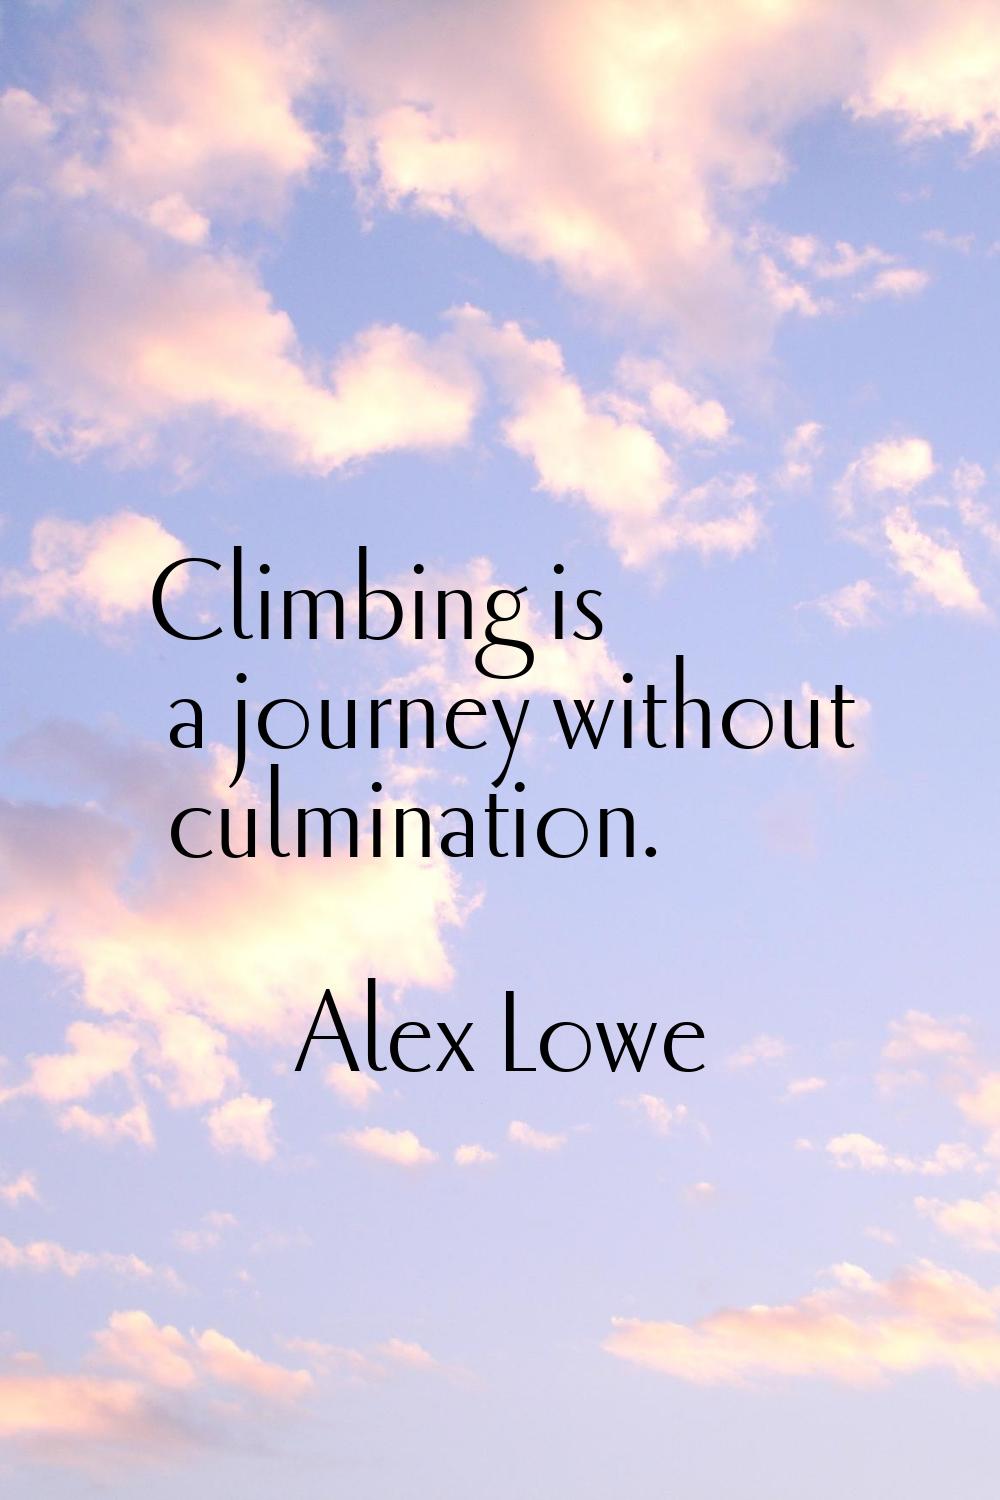 Climbing is a journey without culmination.